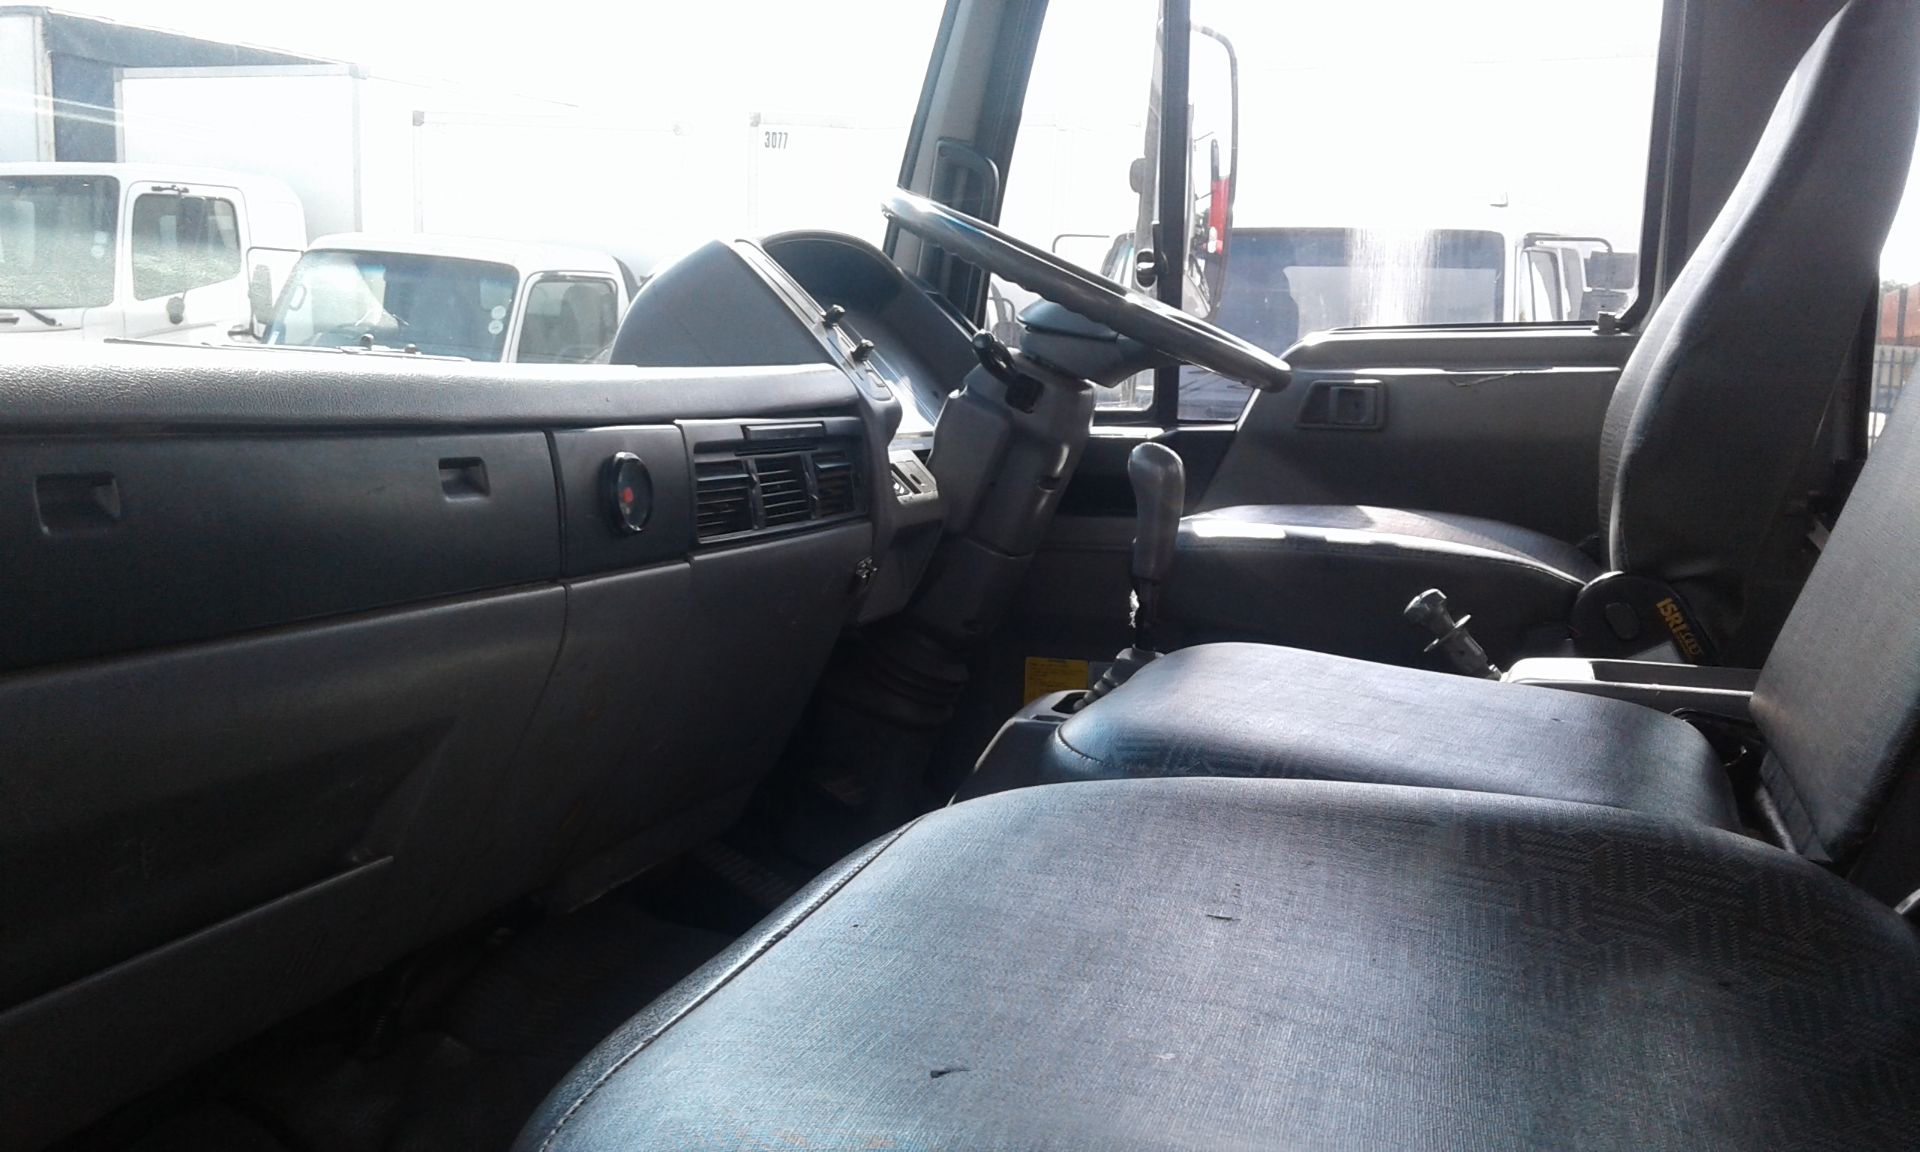 2003 TOYOTA HINO 15-207 D/SIDE - (PSP151GP) - Image 3 of 3